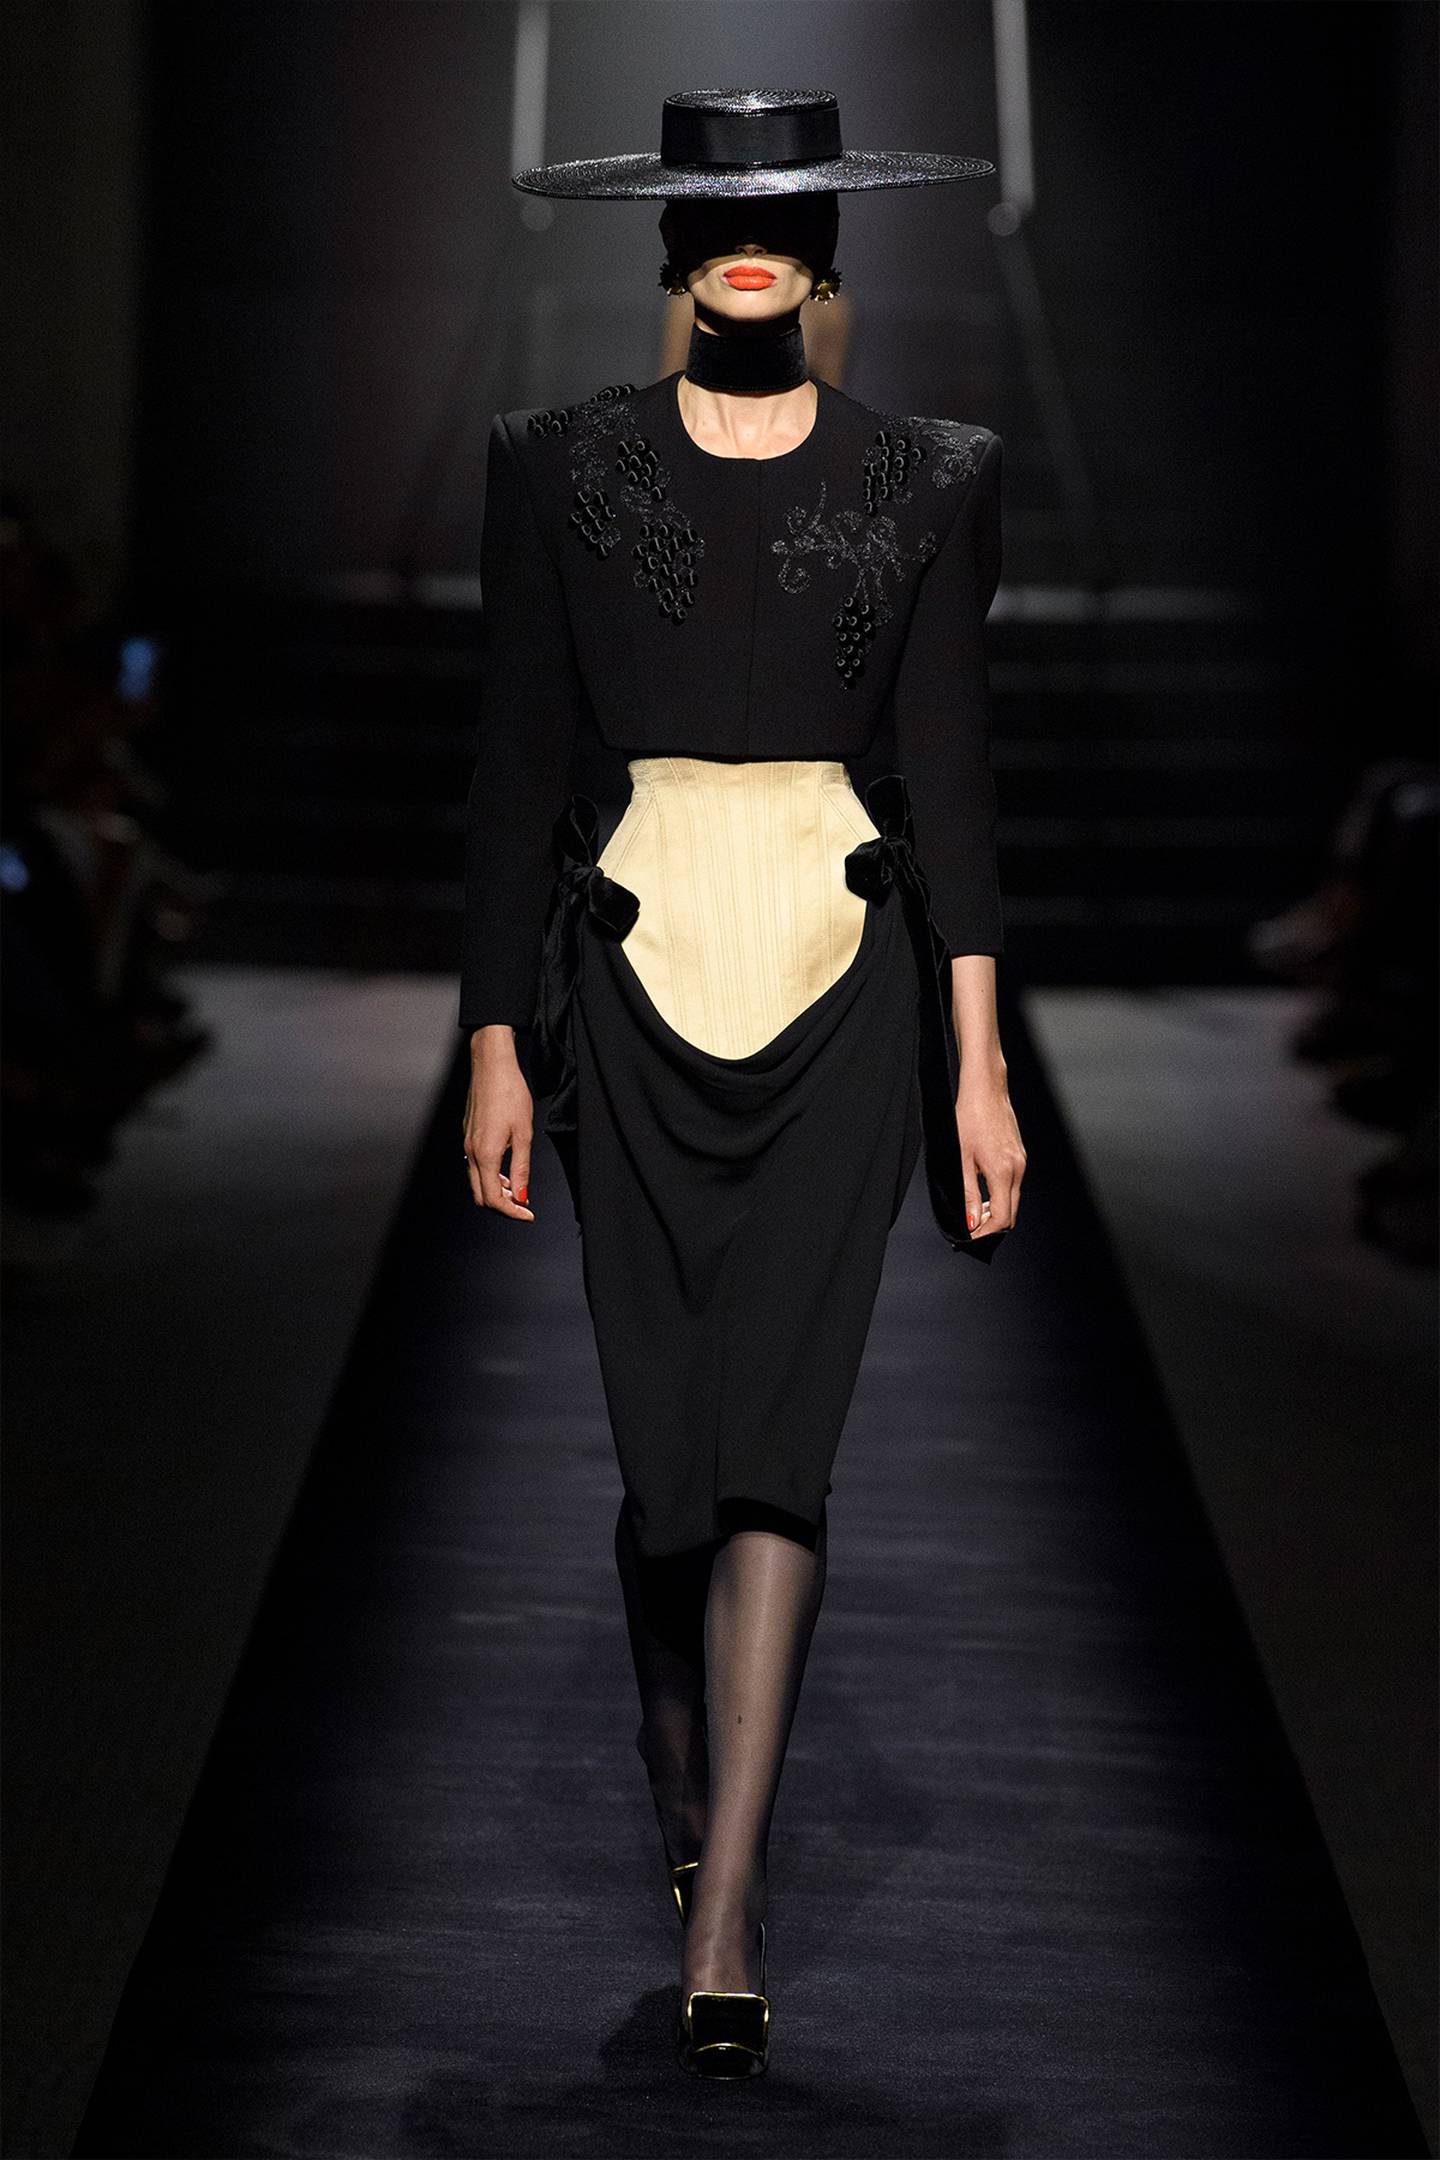 A model wears a black hat and black long sleeved dress with black tights and shoes and a gold belt.